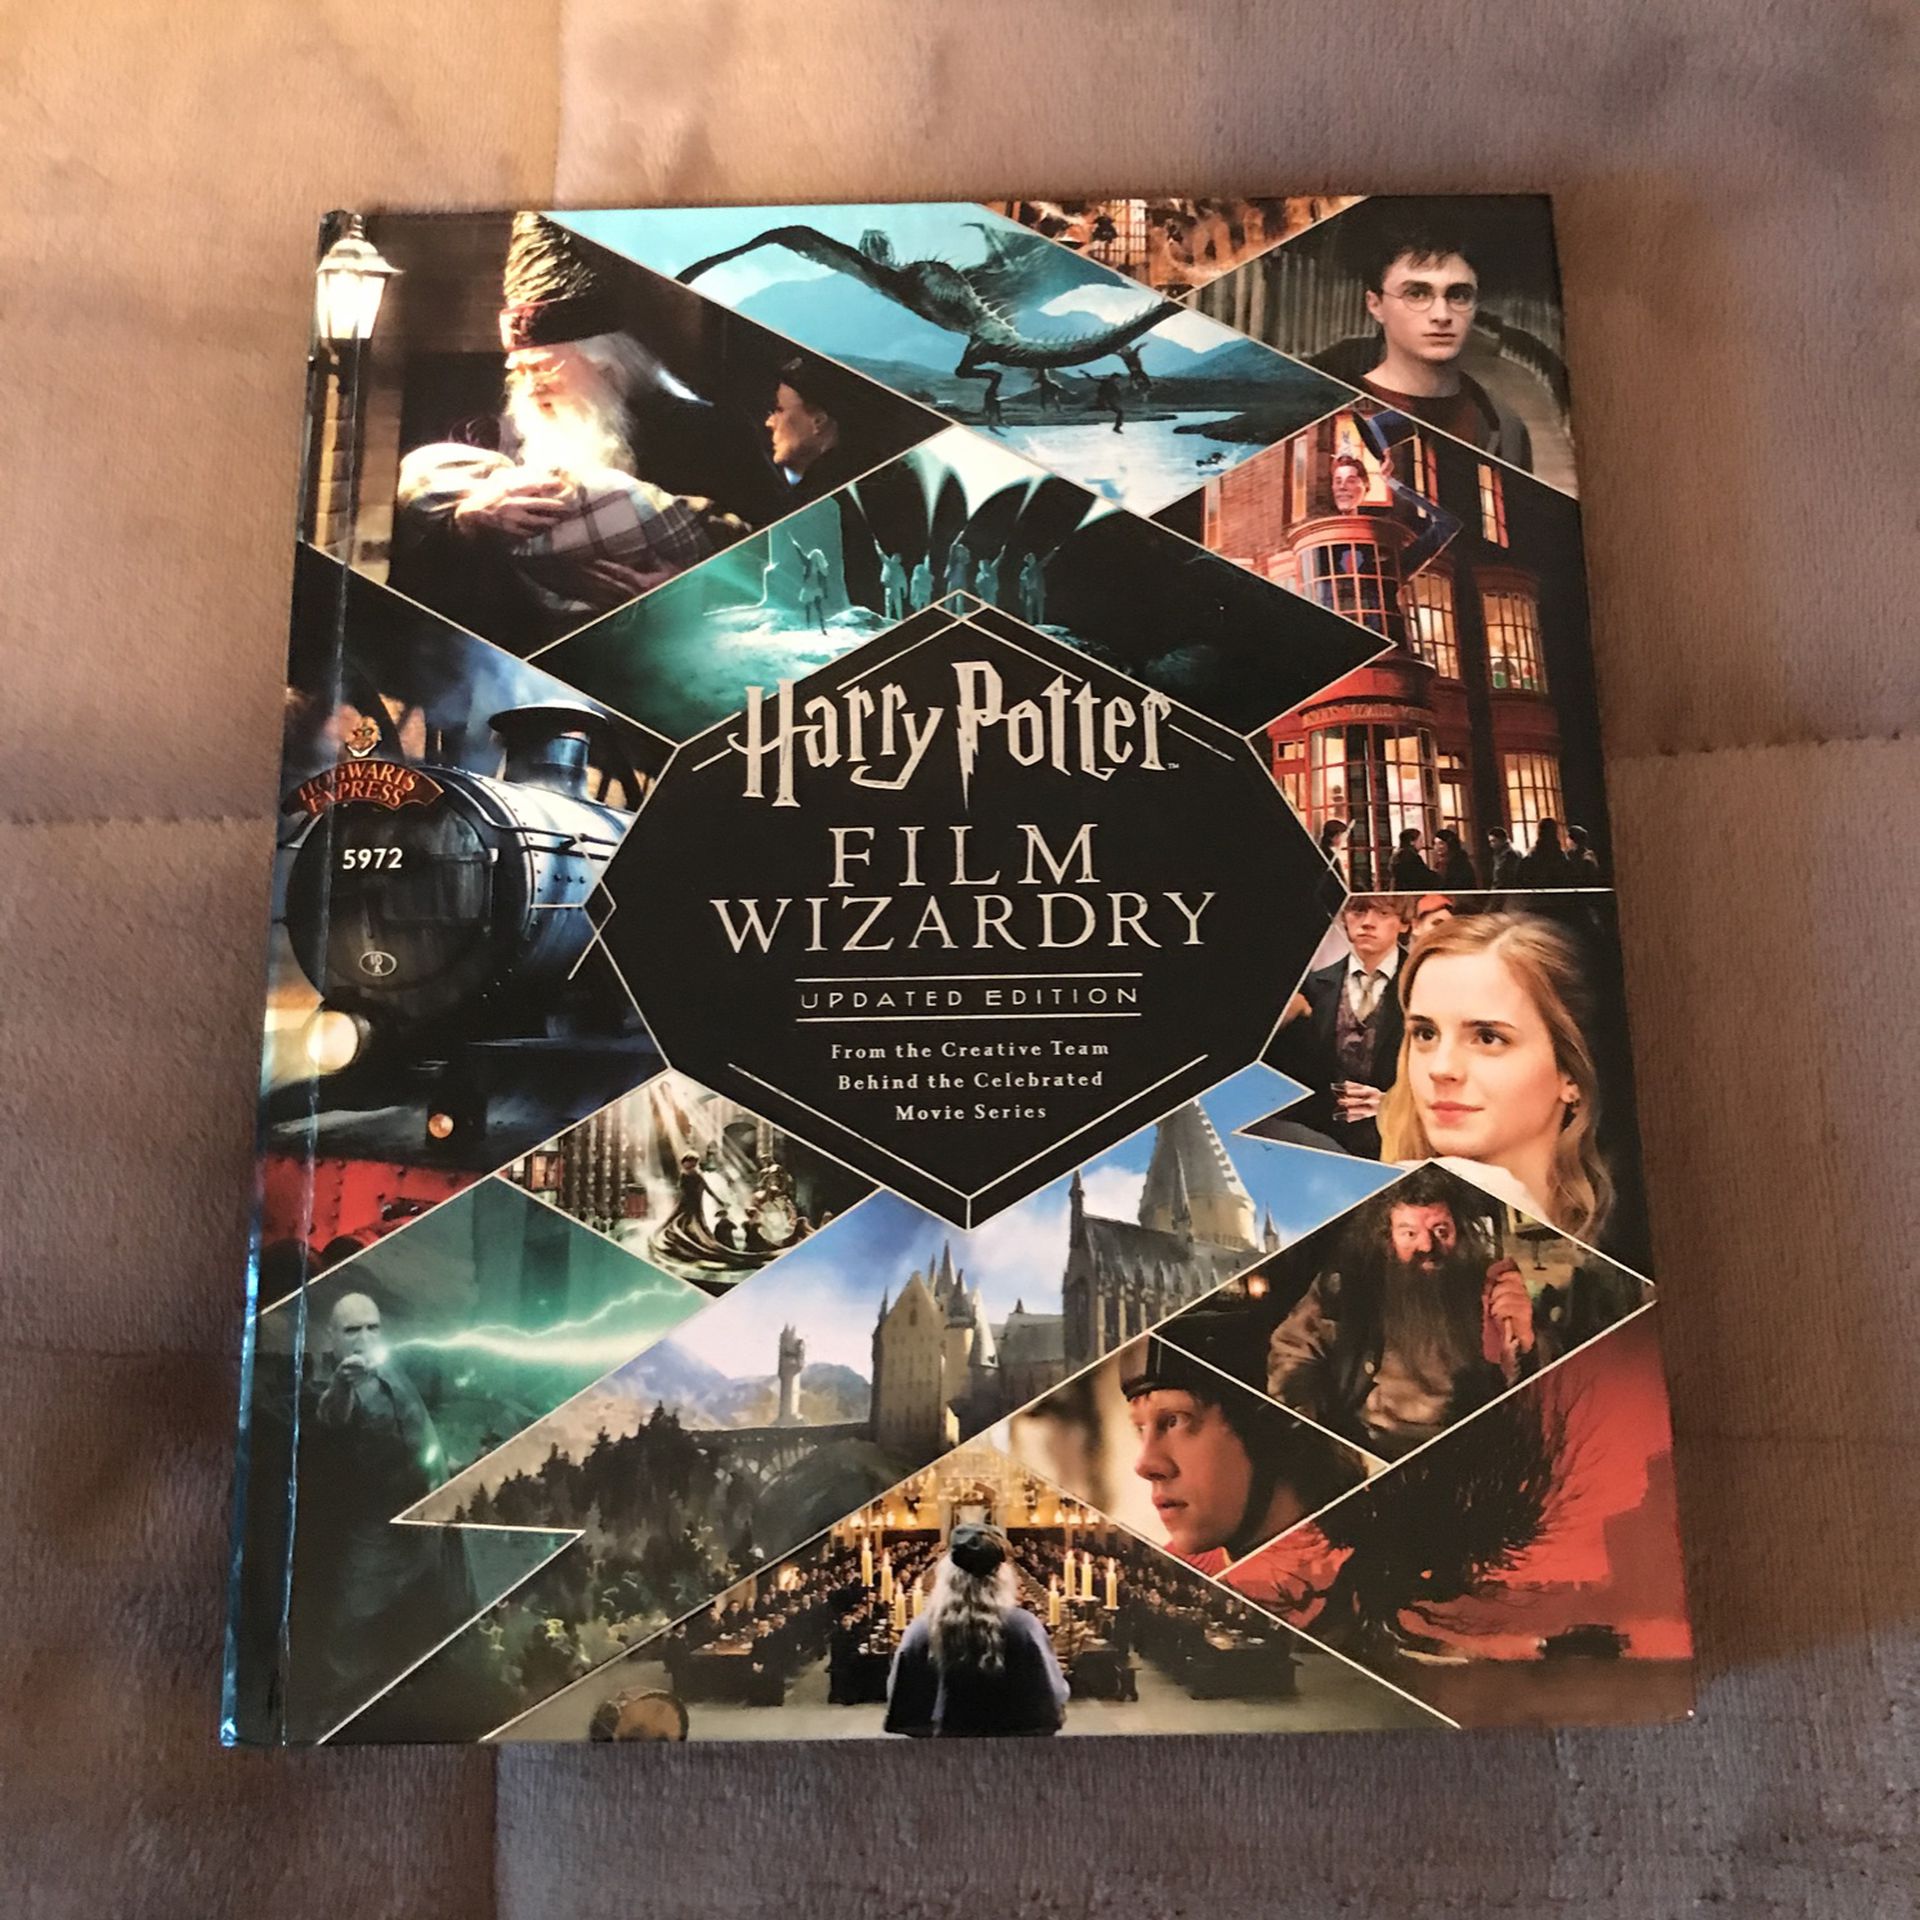 Harry Potter film wizardry updated edition